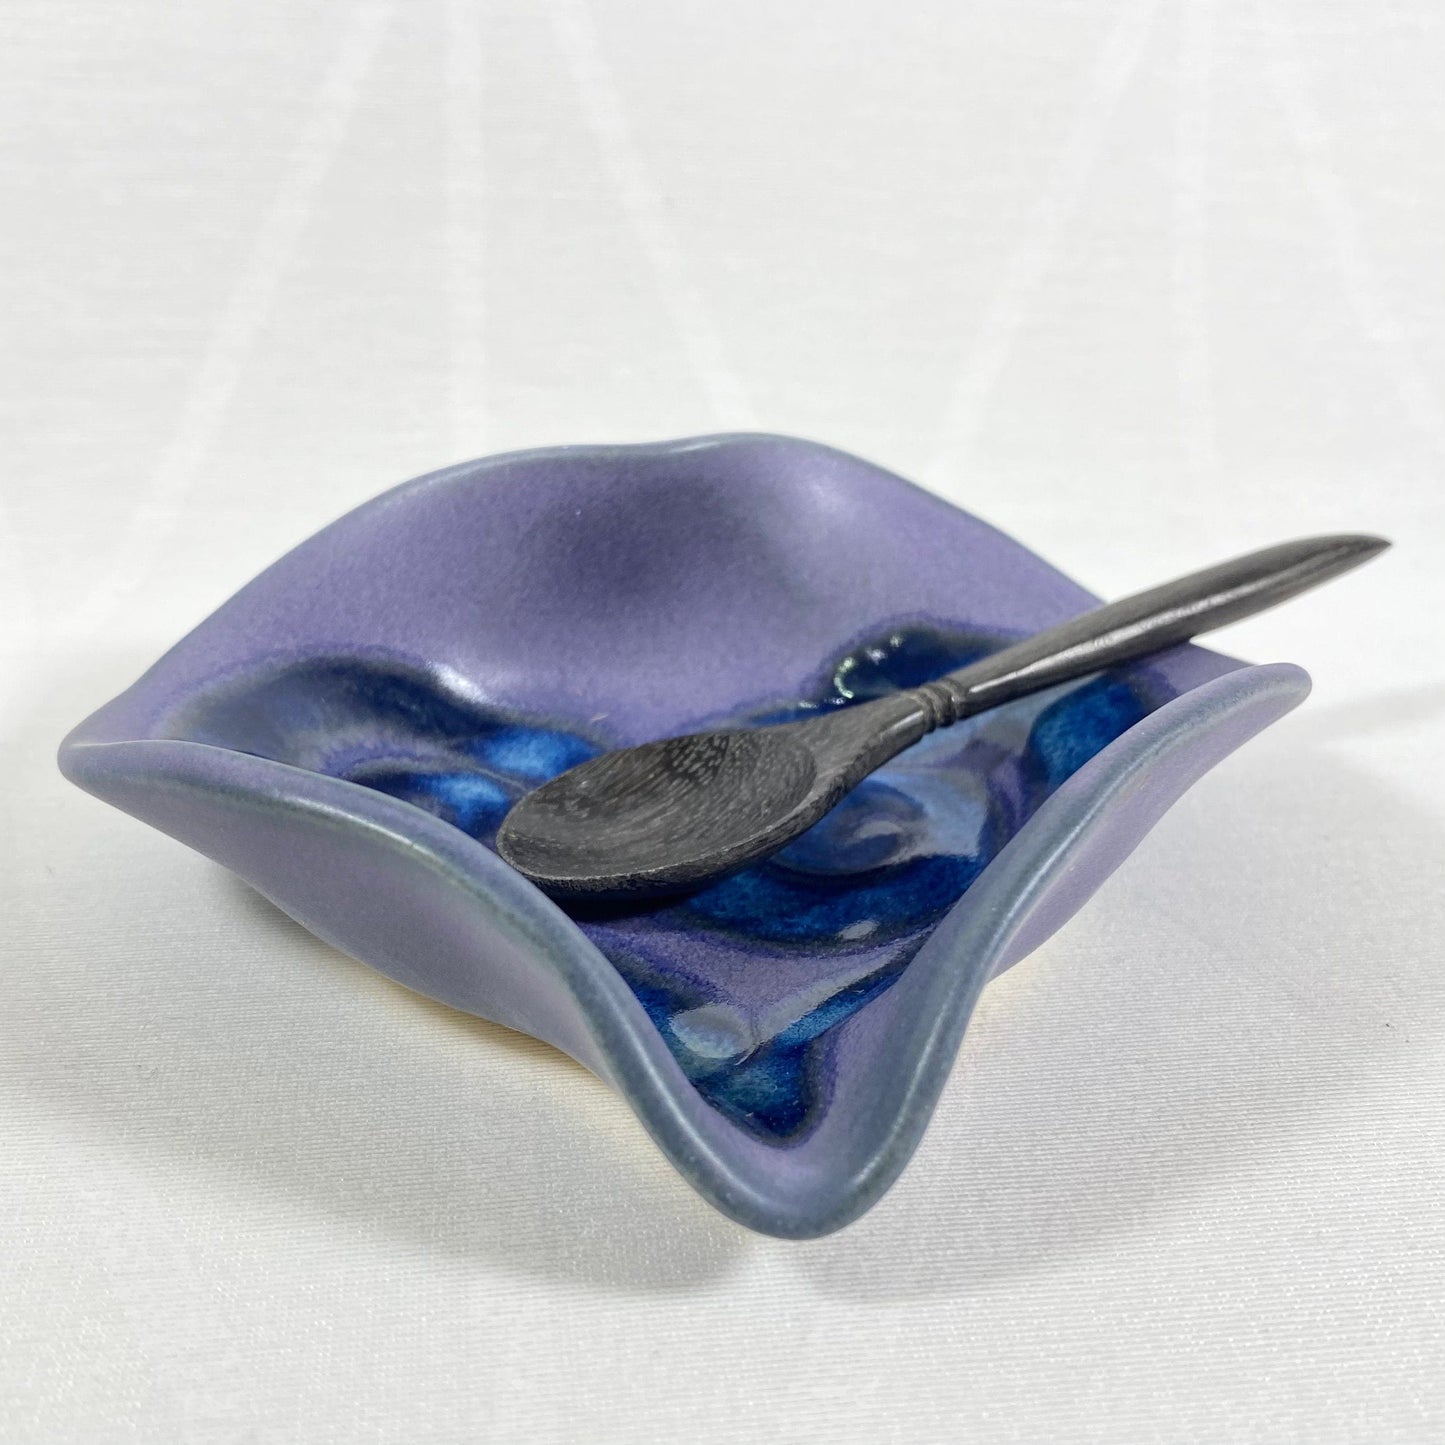 Handmade Purple and Blue Heart Dish with Serving Spoon, Functional and Decorative Pottery